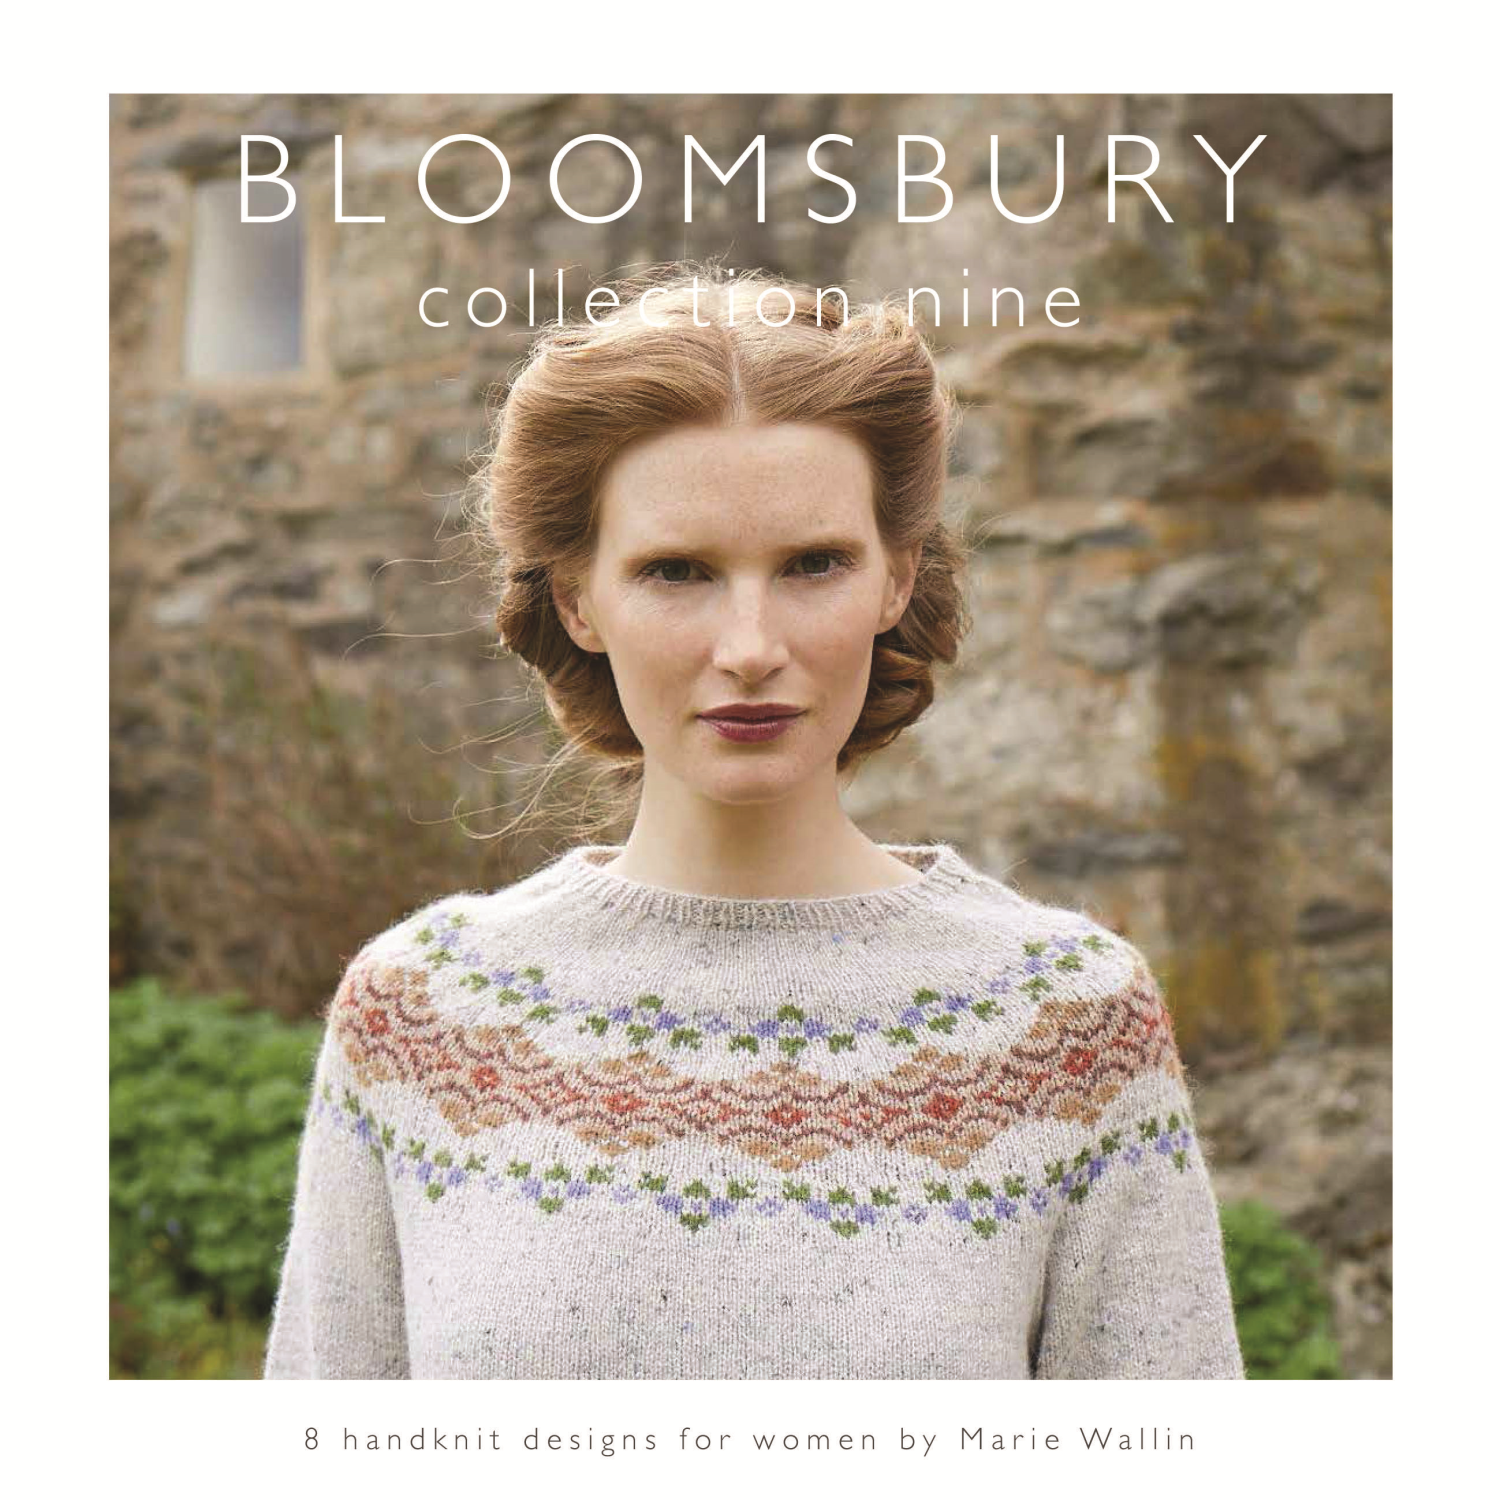 Bloomsbury collection nine by Marie Wallin